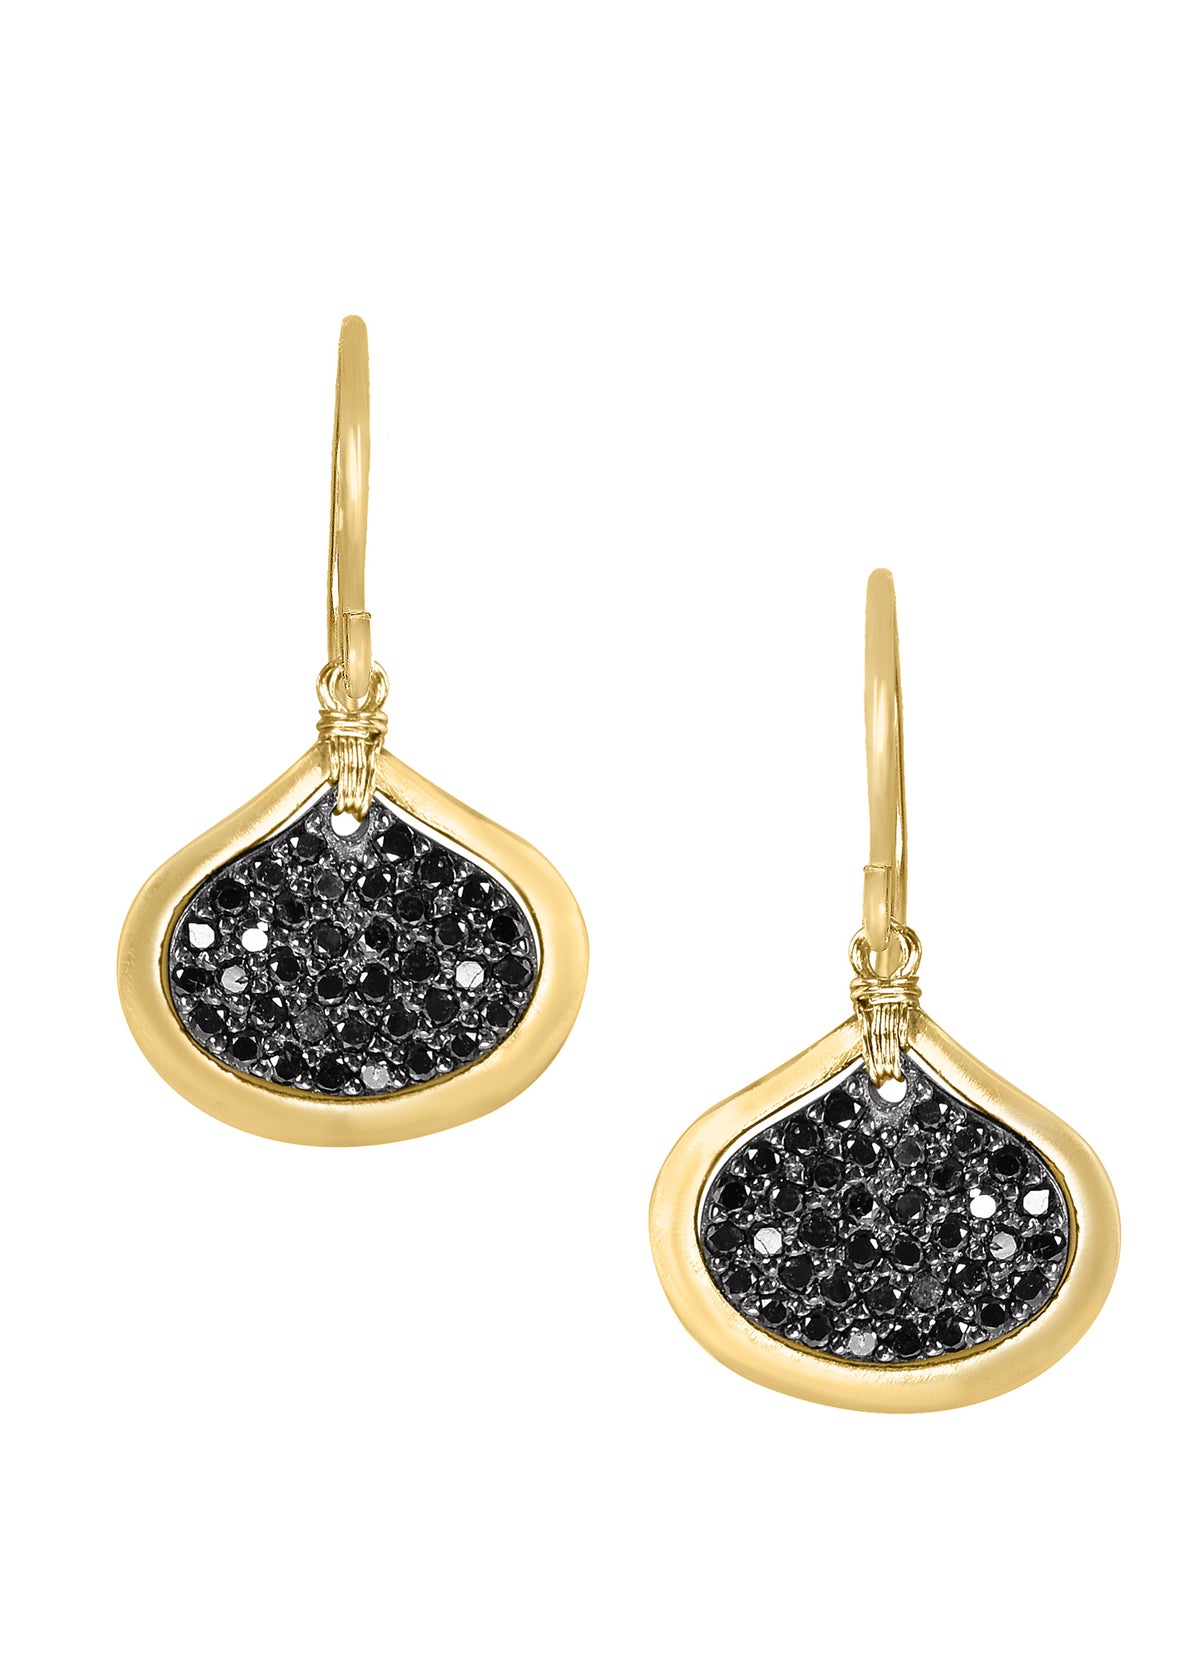 Black diamond 14k gold Special order only Earrings measure 7/8&quot; in length (including the ear wires) and 1/2&quot; in width at the widest point Handmade in our Los Angeles studio